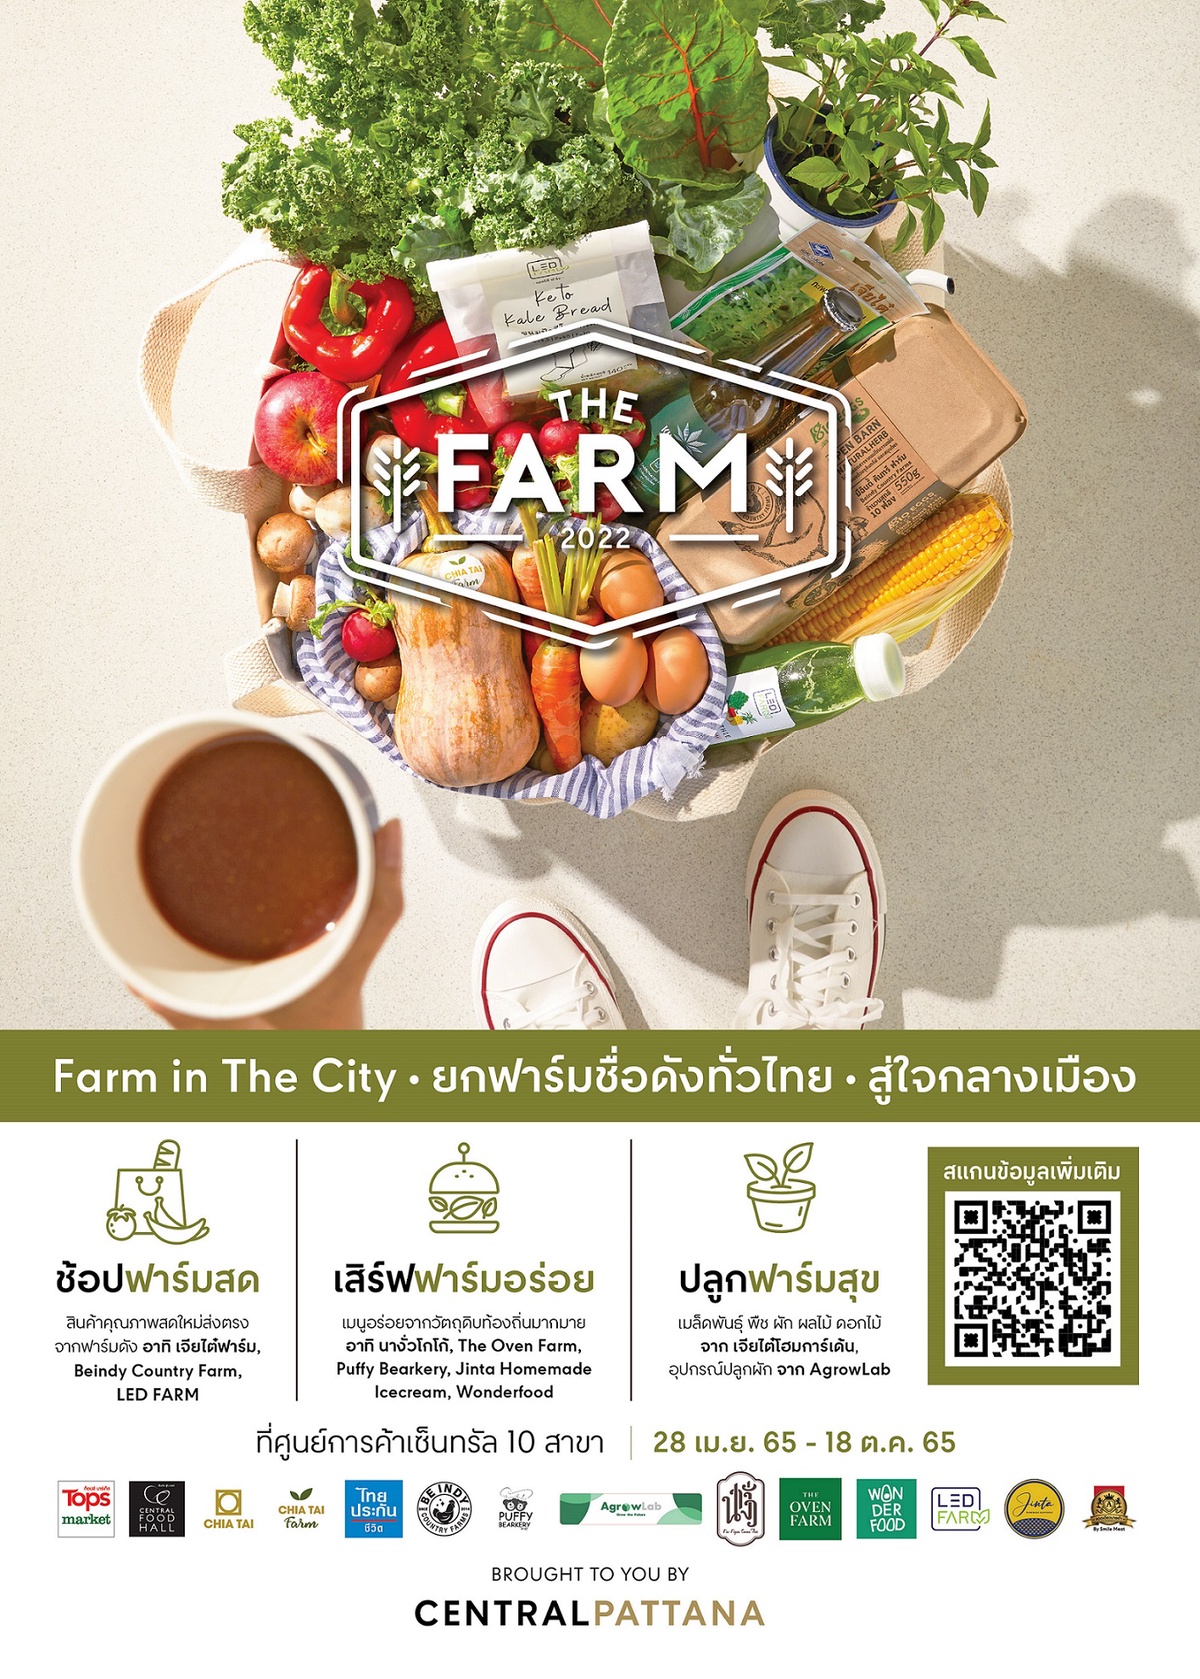 Central Pattana presents 'THE FARM 2022' bringing together high-quality products, fresh and organic ingredients from well-known farms nationwide in one place from 28 April to 18 October 2022 at 10 branches of Central shopping centers nationwide